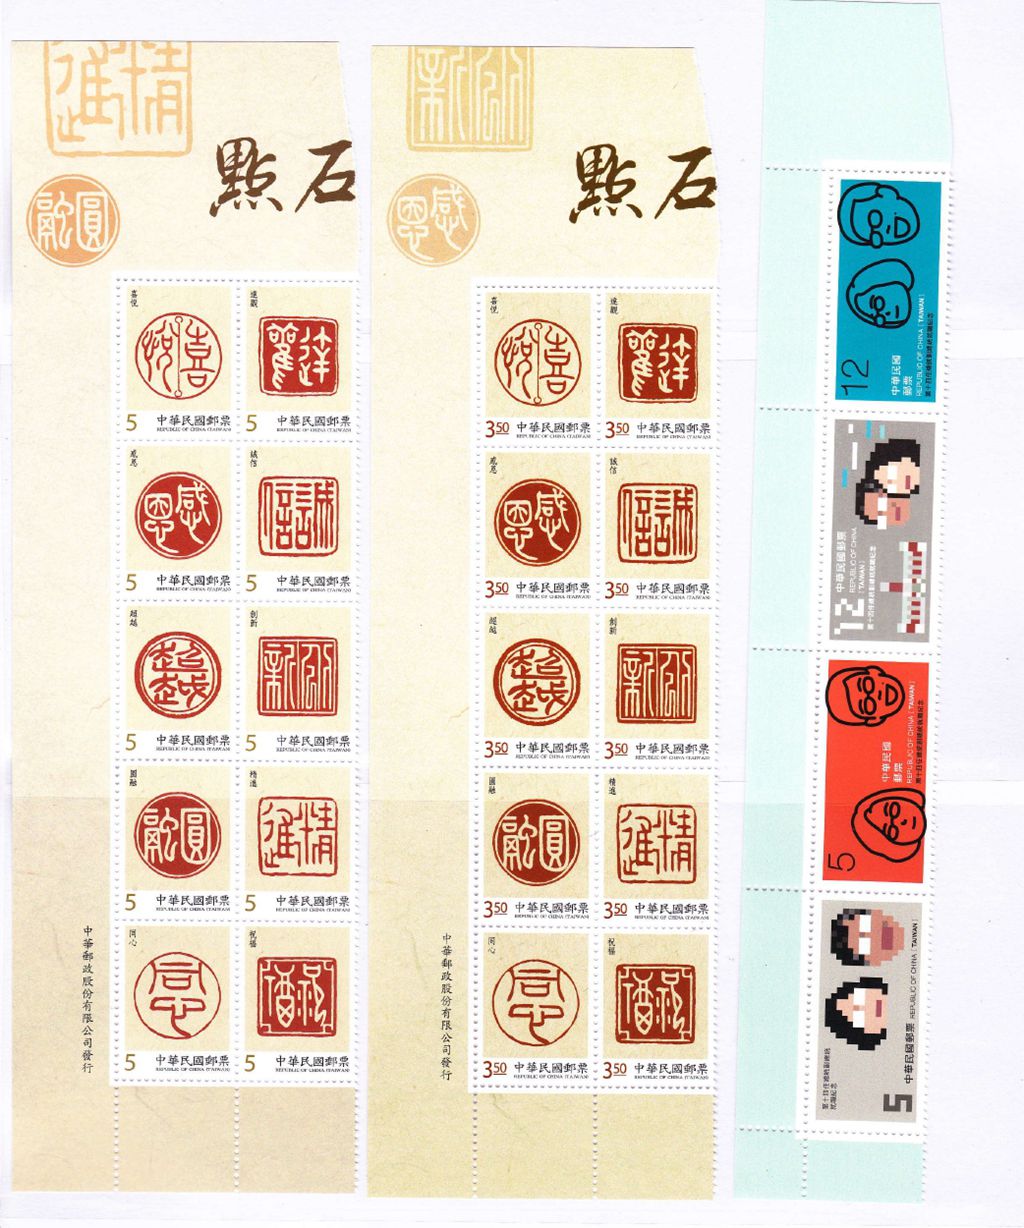 M8303, Taiwan (R.O.China) 2016 Full Year Stamps and MS, with Bamboo Stamp